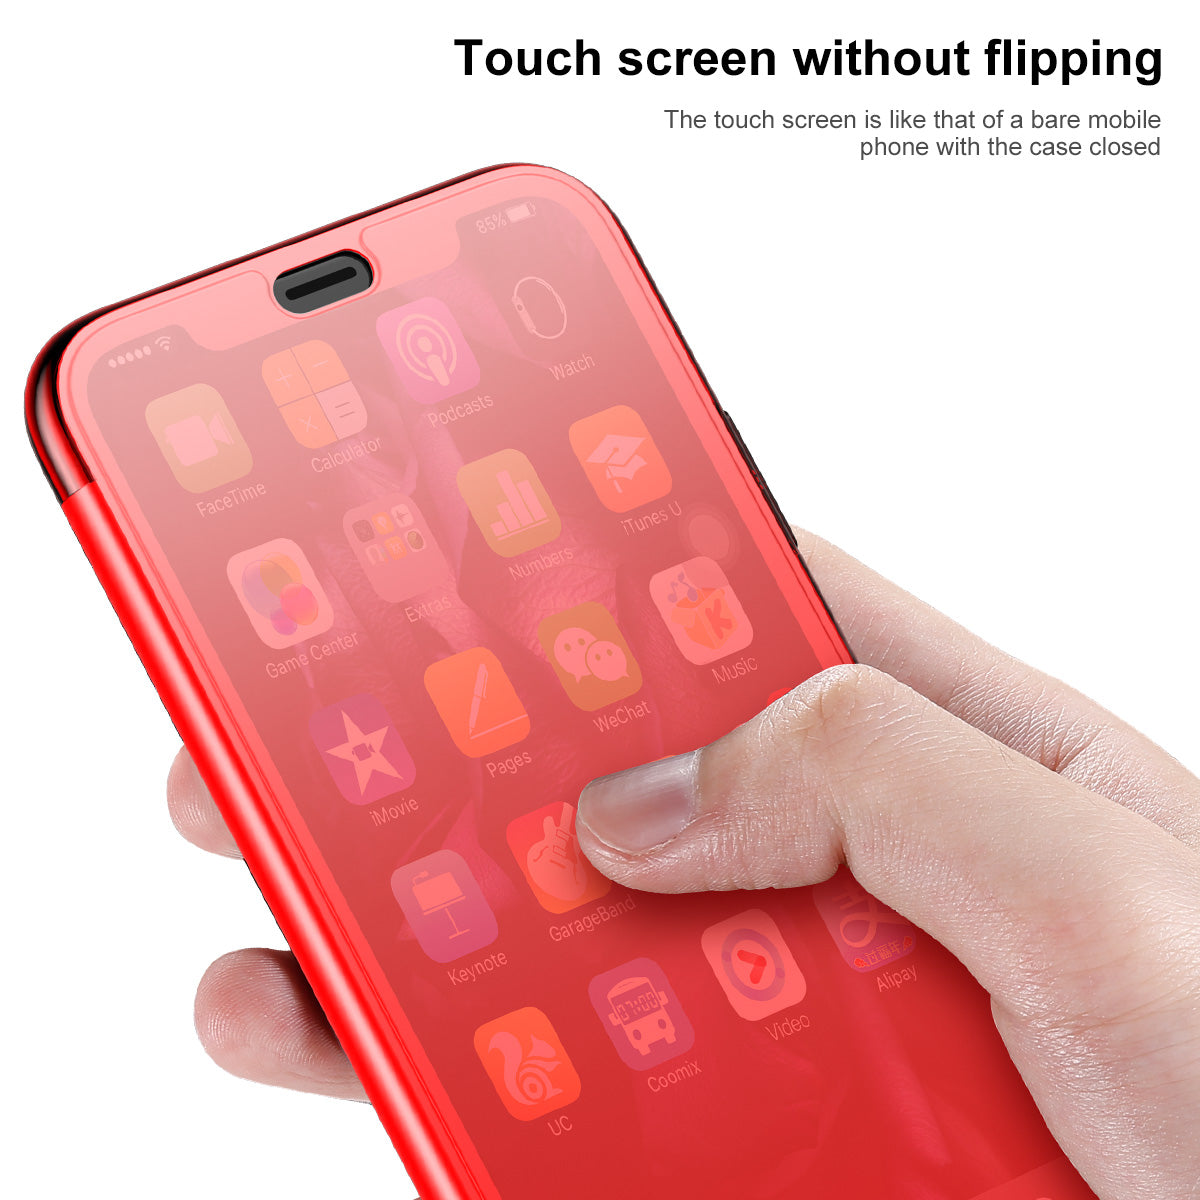 iPhone-X-Baseus-Touchable-Case-Red-Touch_RZL0Y6IAF2DR.jpg